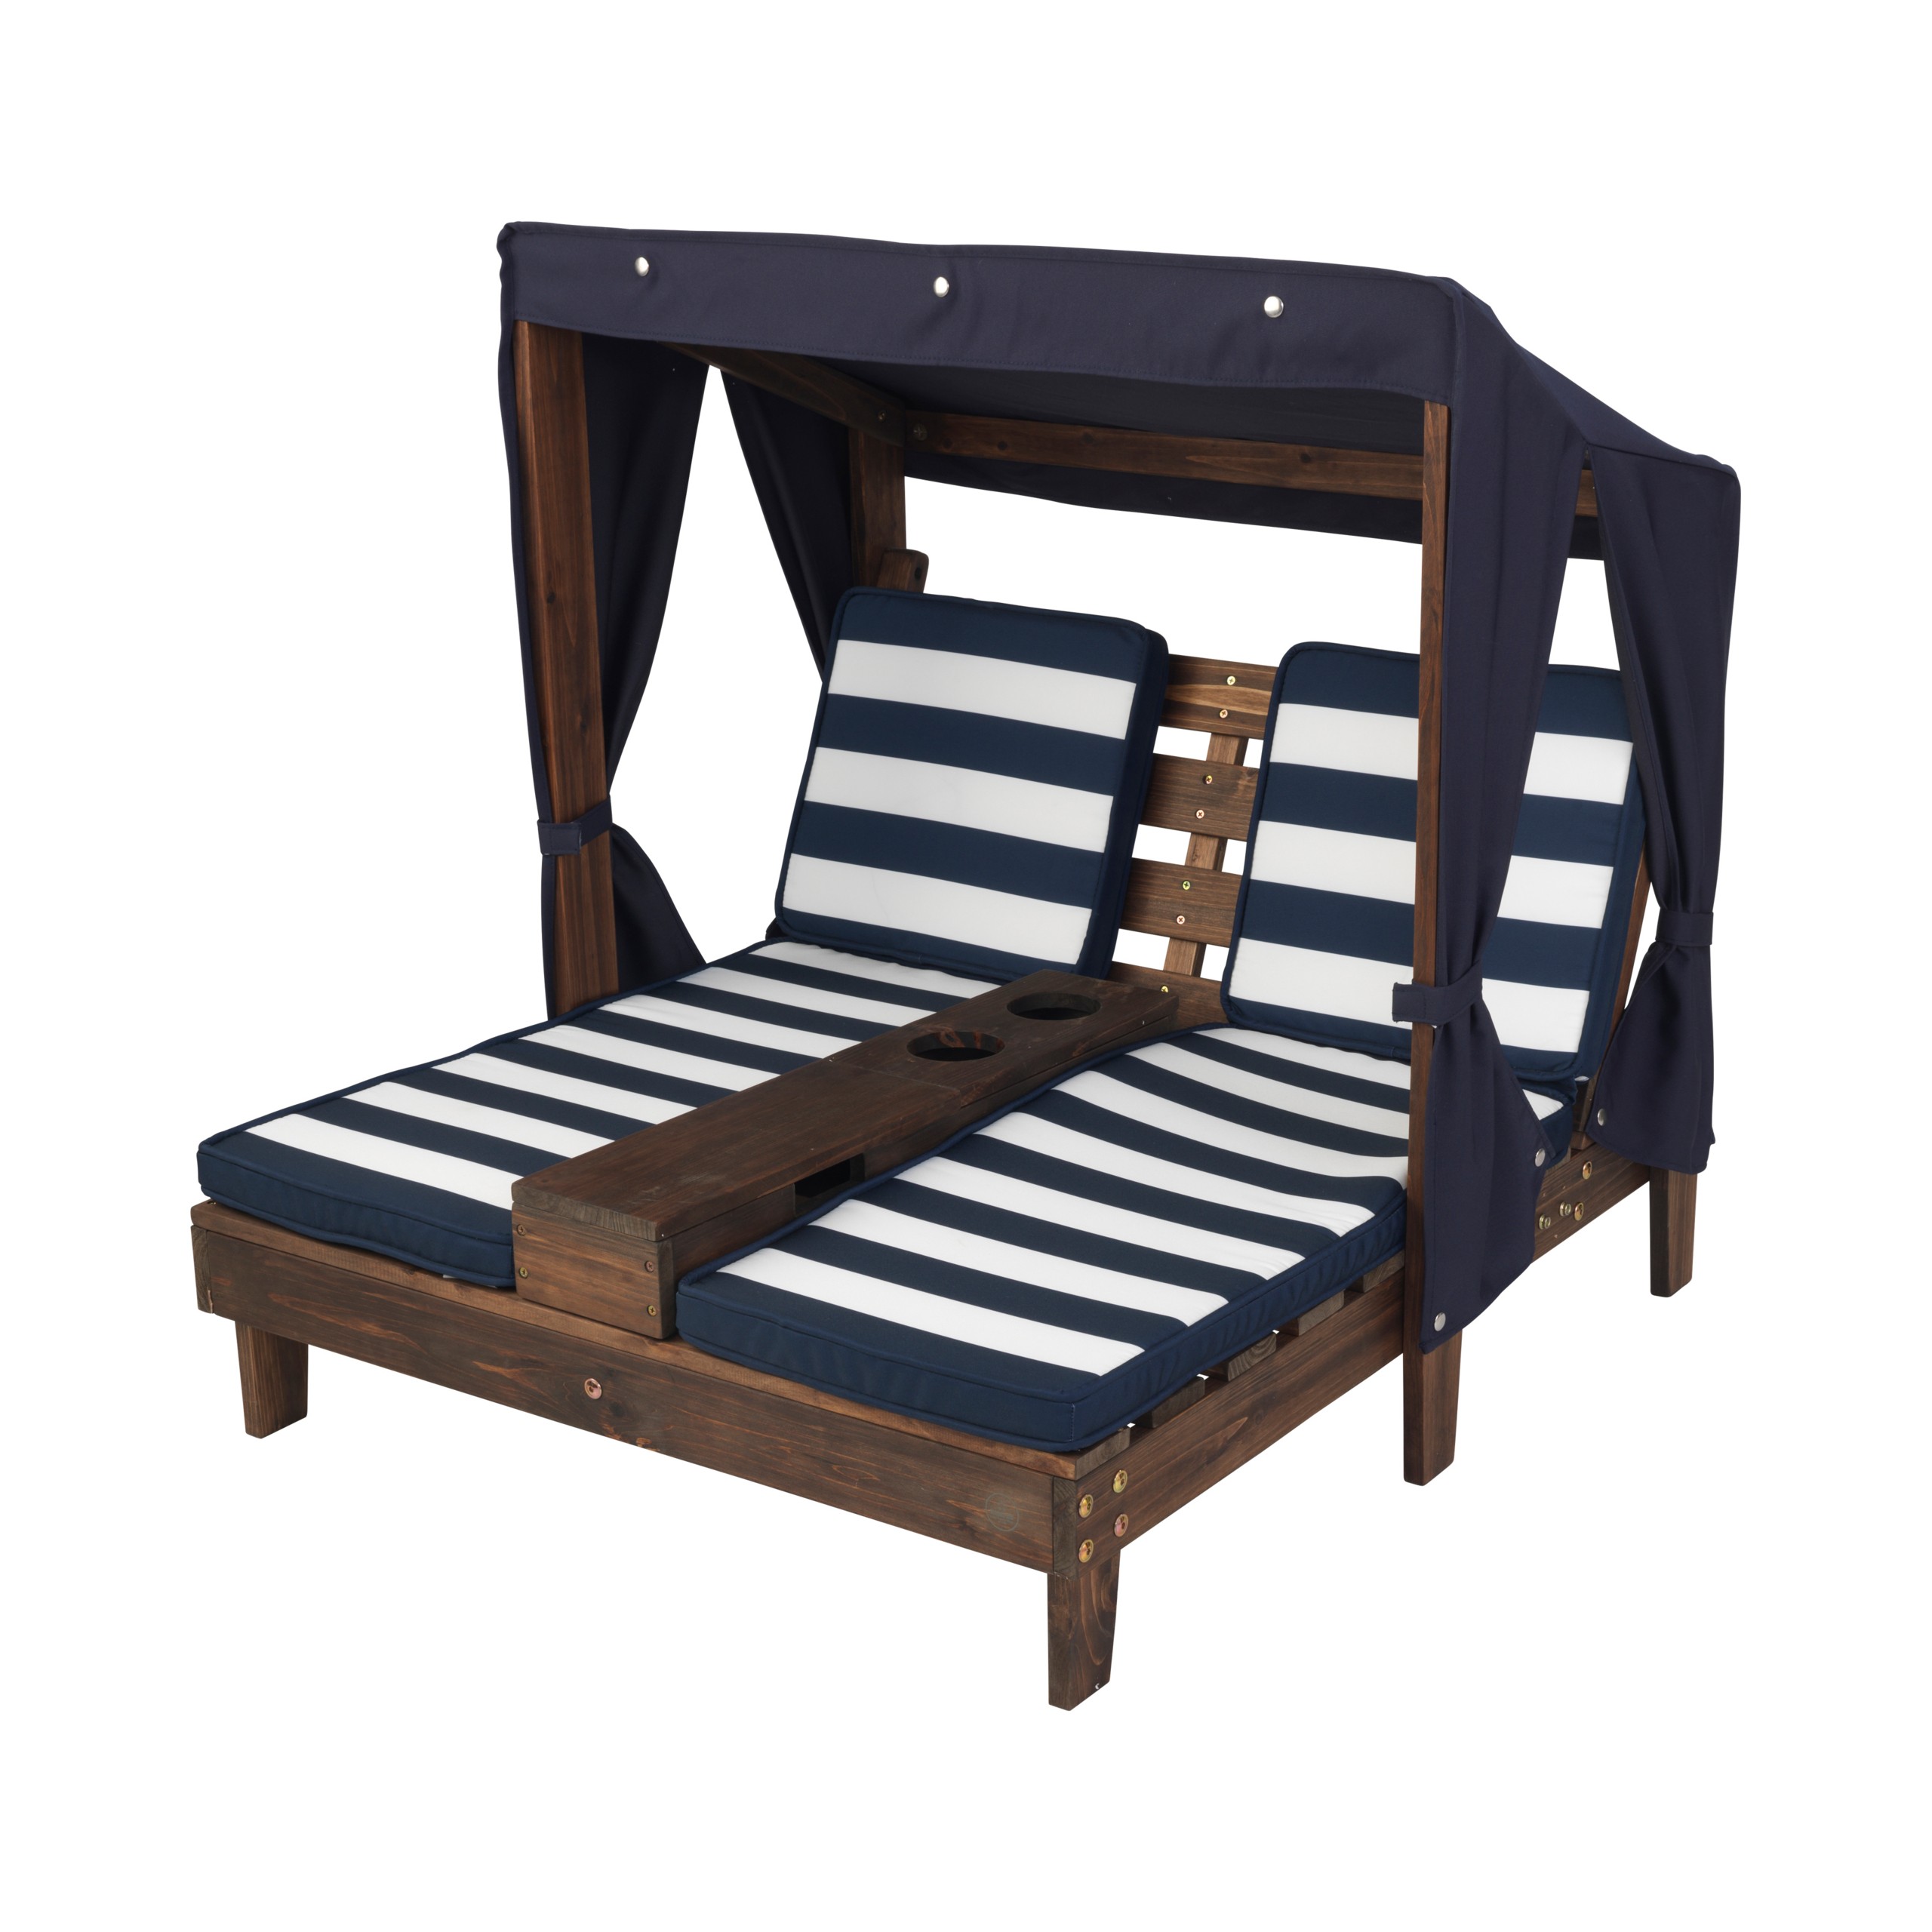 Kids double chaise lounge navy white stripes little